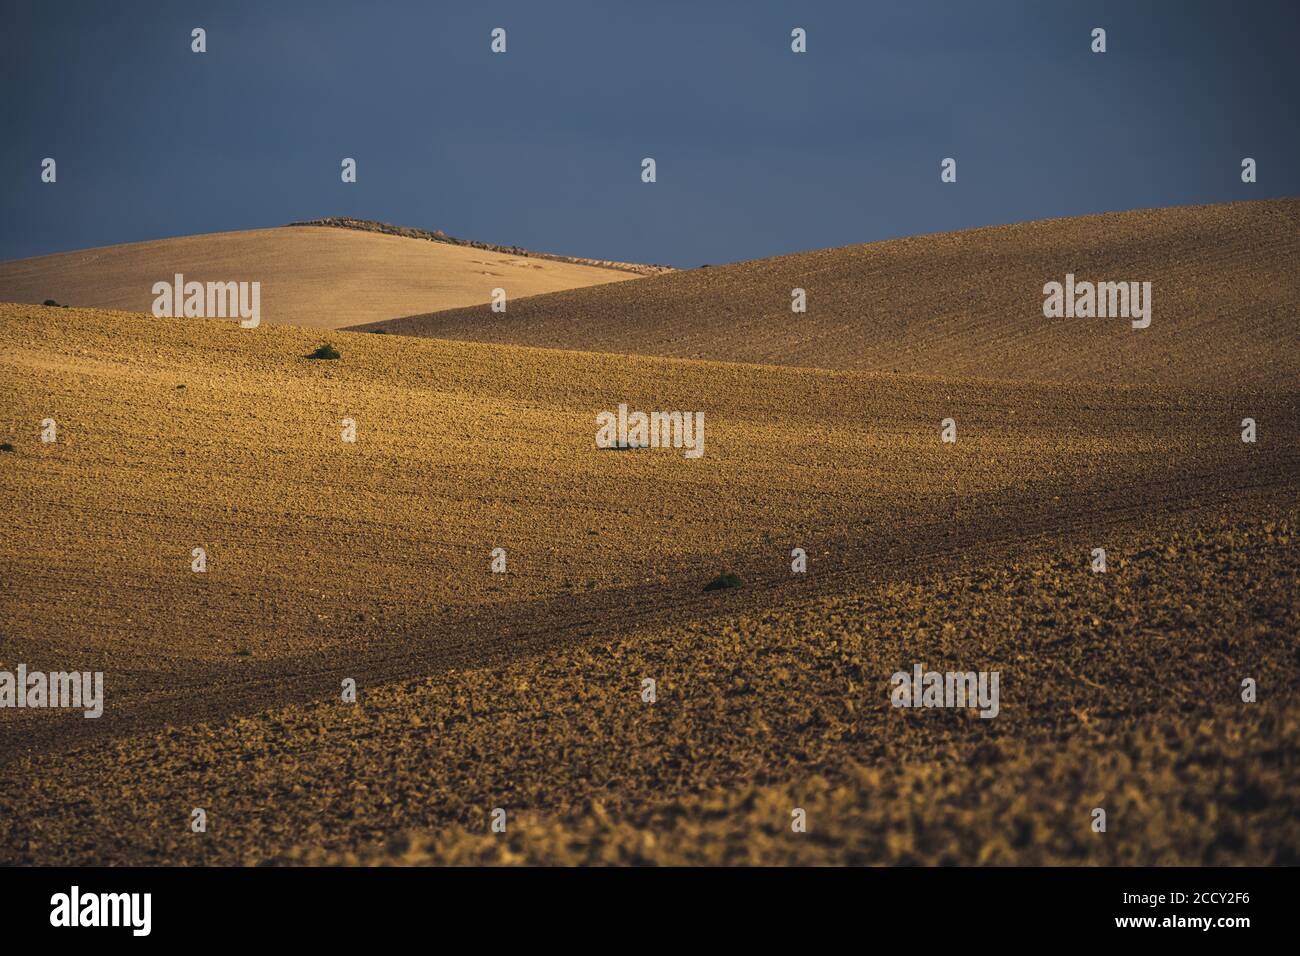 Cropland located on hills, Southern Italy, Italy Stock Photo